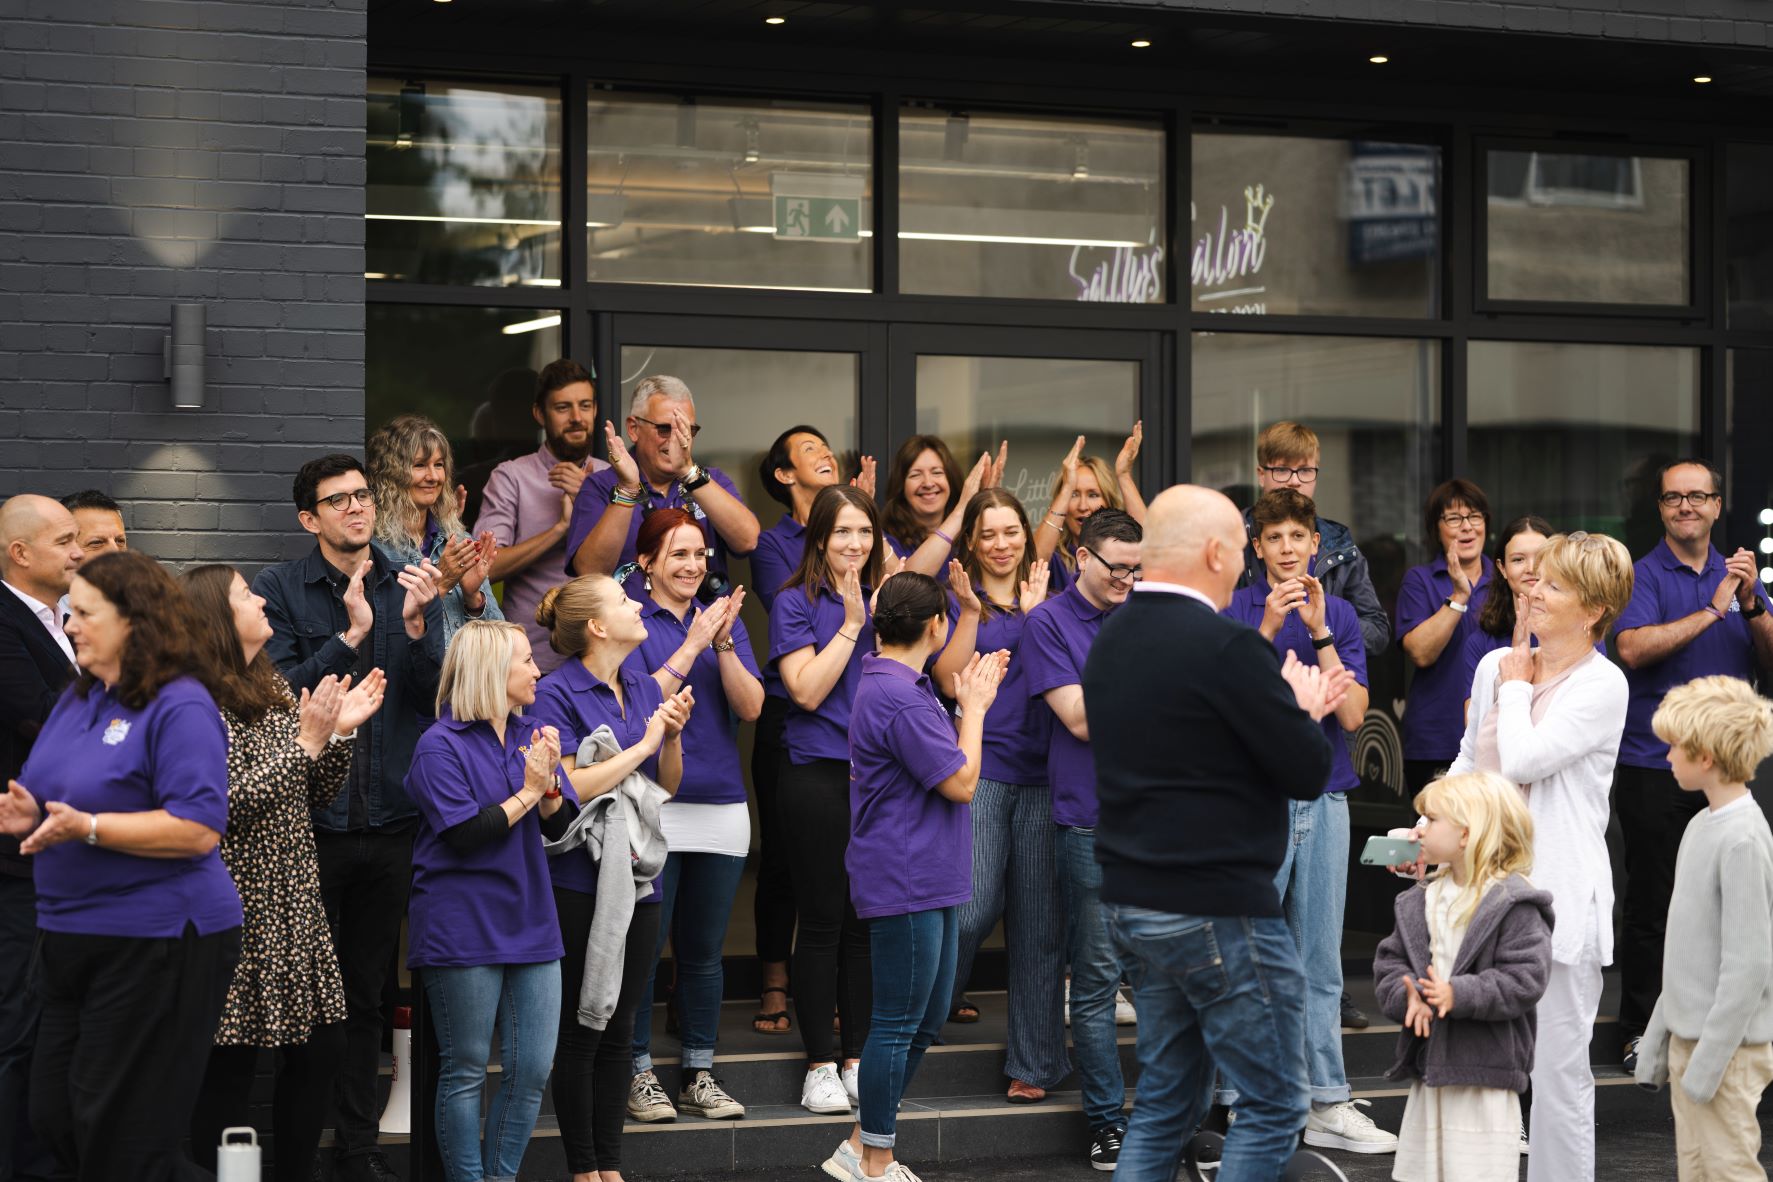 Our staff and supporters celebrate the opening of our new home.